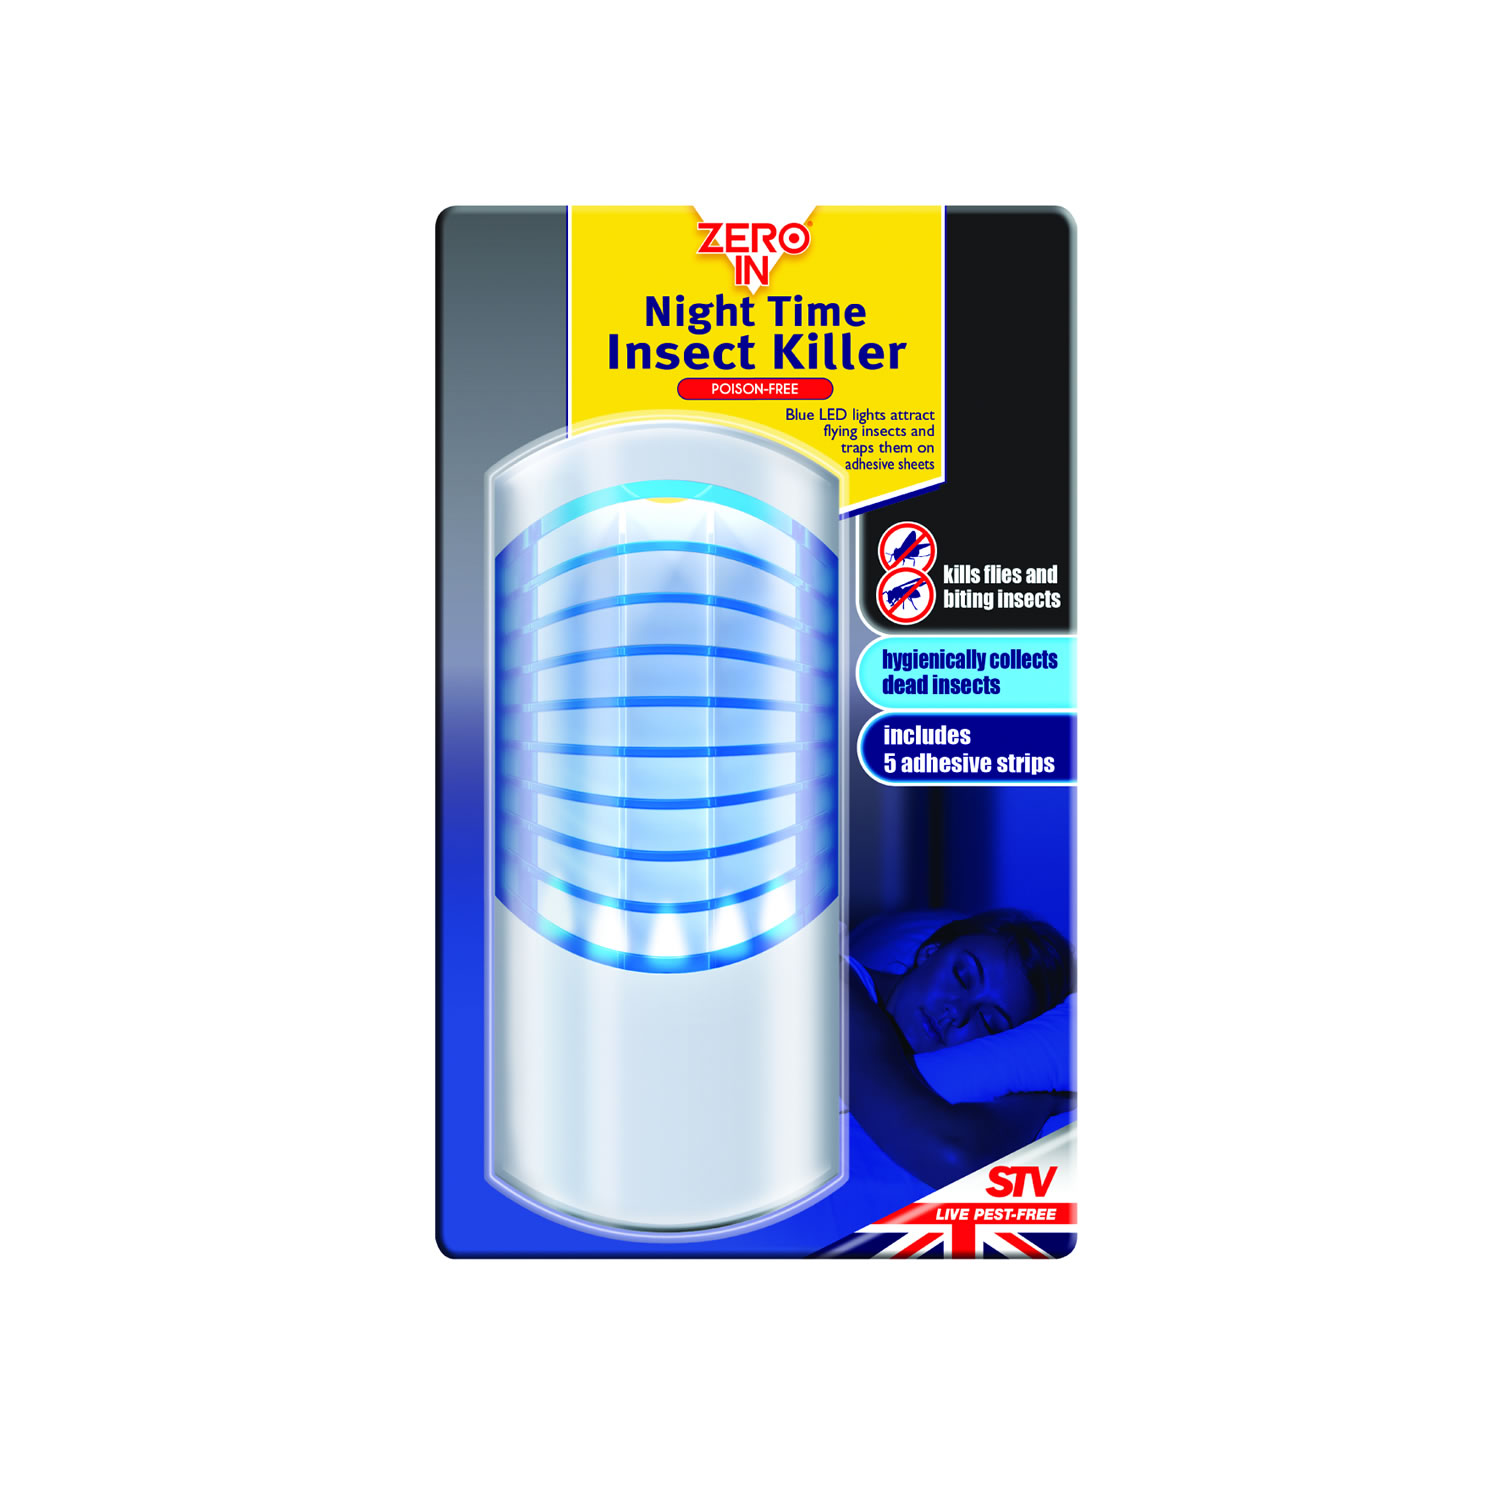 ZERO IN NIGHT TIME INSECT KILLER